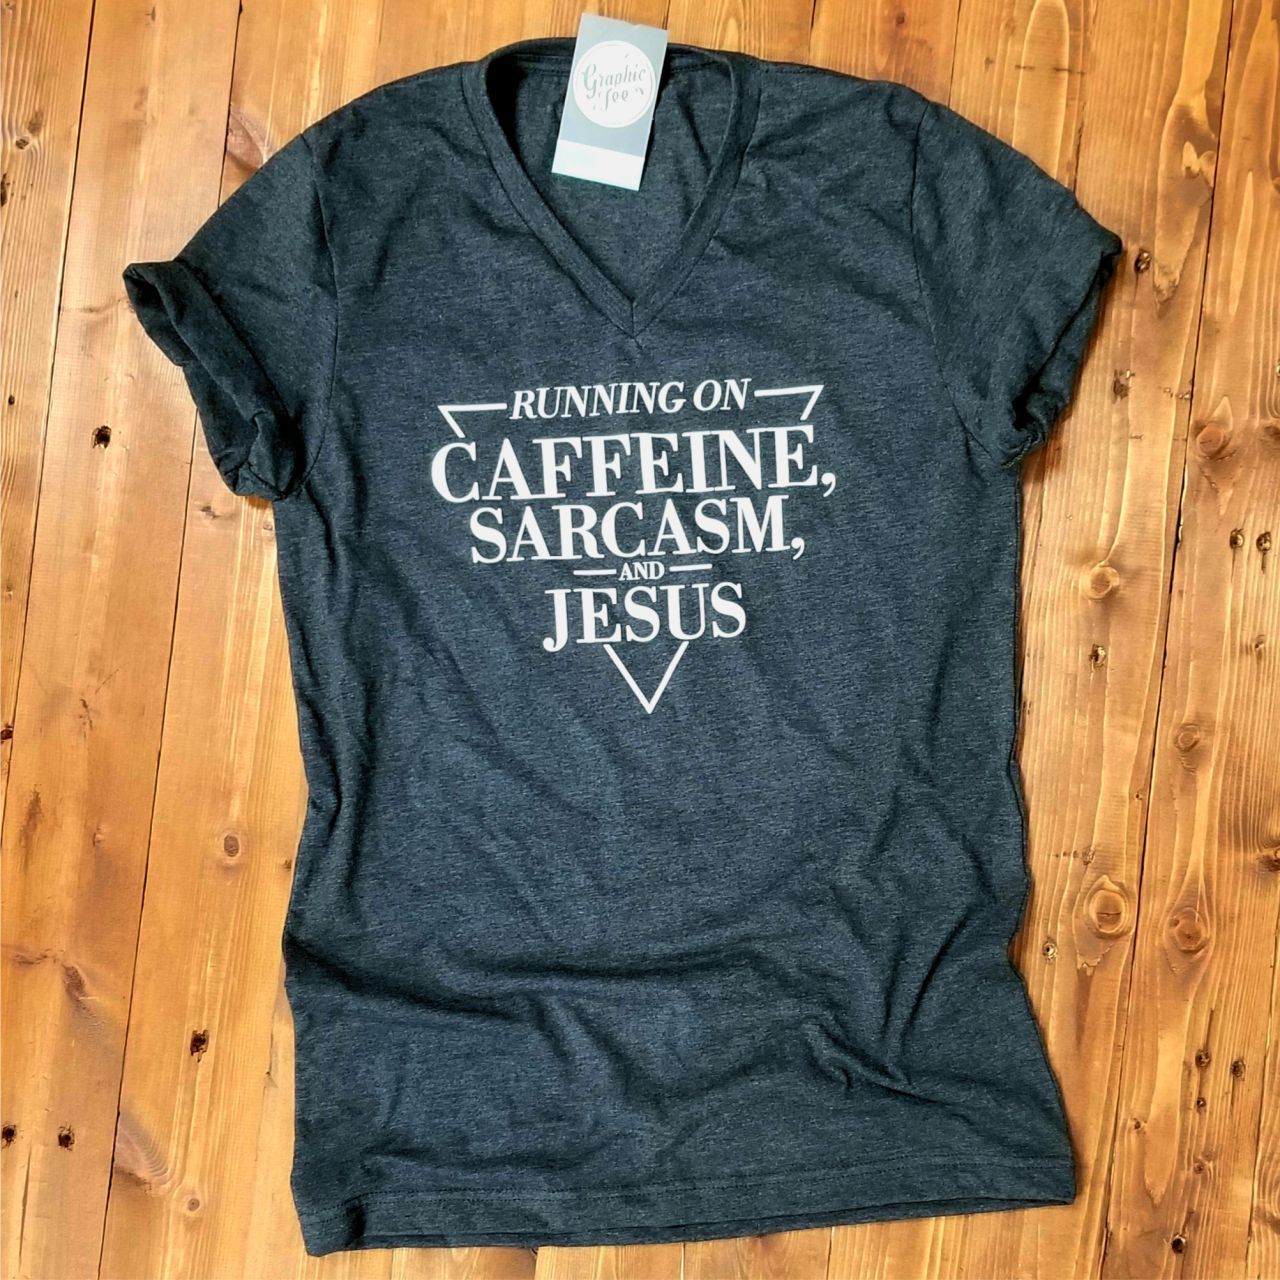 Running on Caffeine, Sarcasm and Jesus - V-Neck Tee - The Graphic Tee